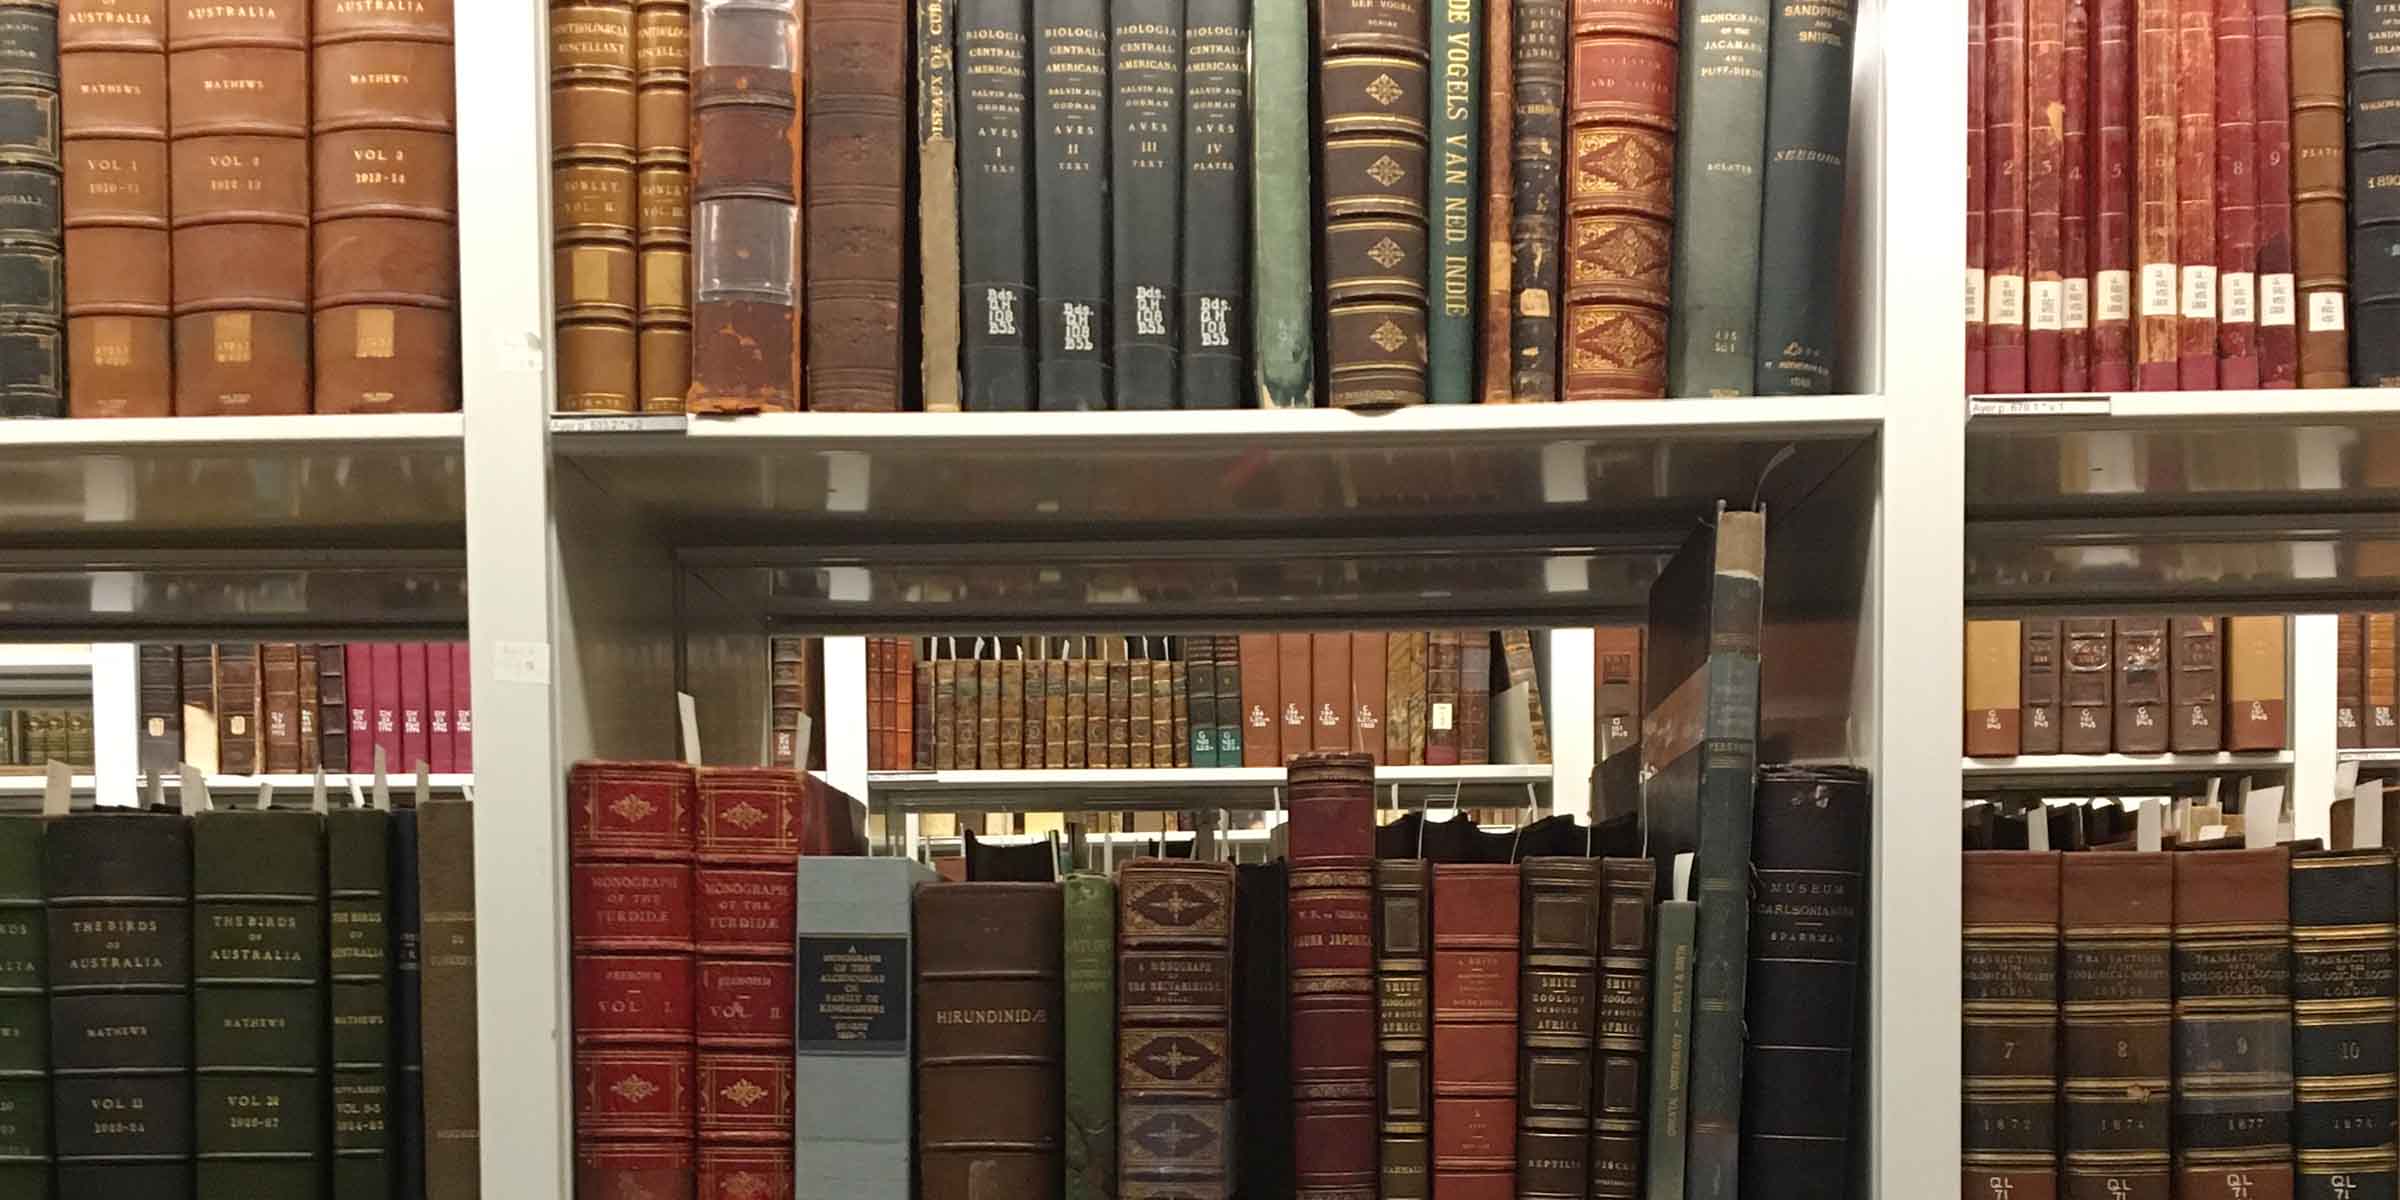 Shelves of large, ornate books in different colors (green, brown, red, blue), many with gold designs emblazoned on their spines